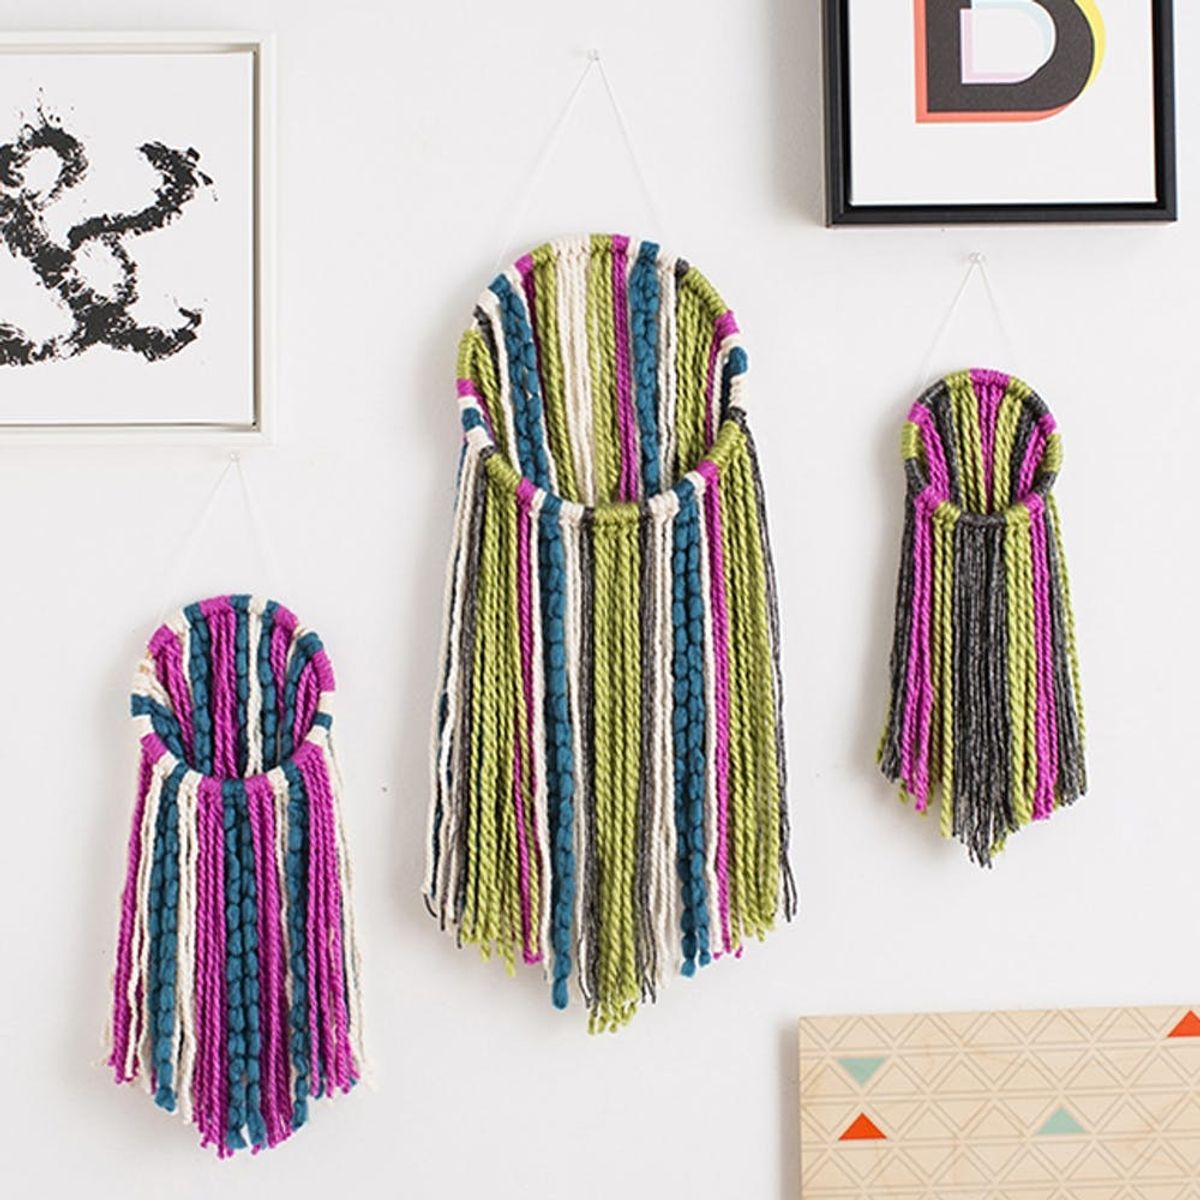 This DIY Wall Hanging Is the Best Way to Use Yarn in the Summer